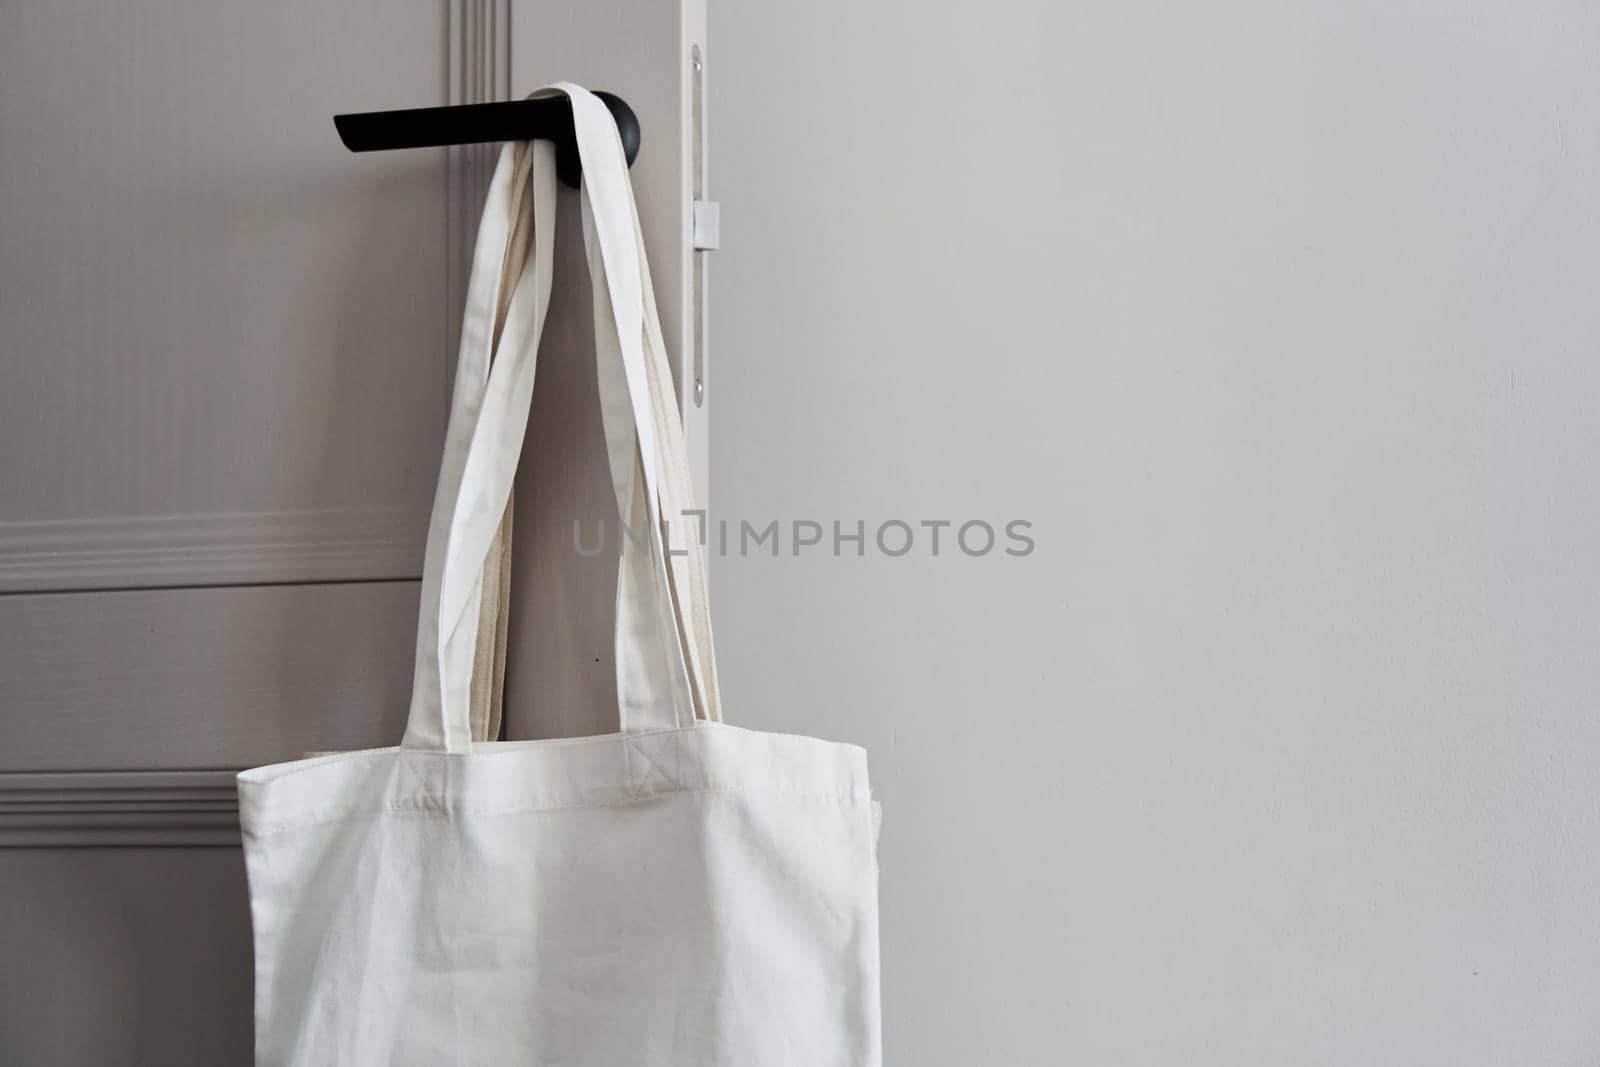 Eco friendly concept with white canvas tote bag hanging on door knob with two toned colored, Eco blank shopping sack with free copy space, Reduce plastic bags to reduce global warming. Canvas tote bag